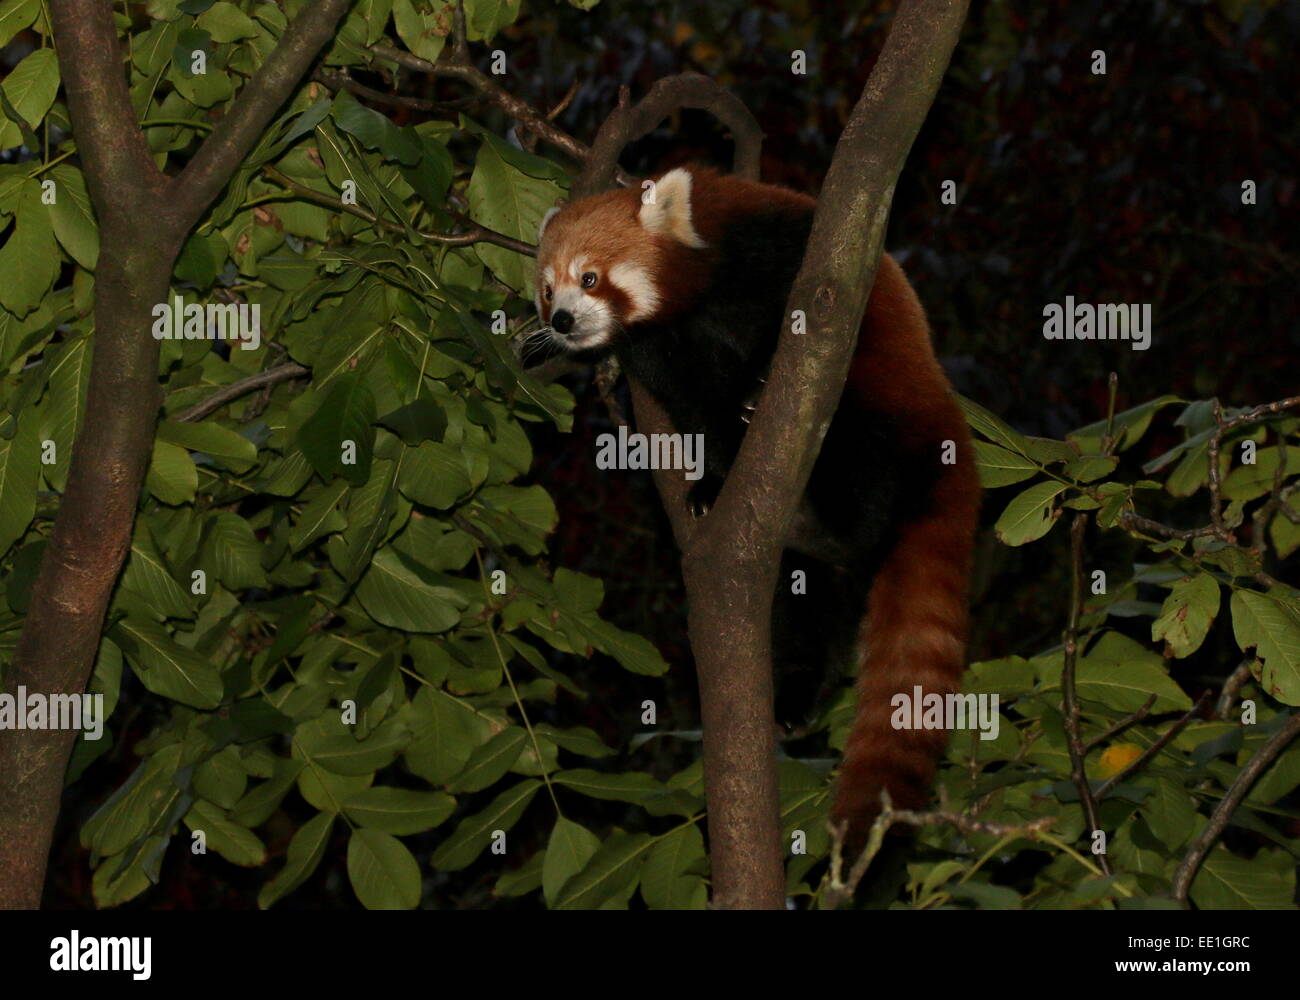 Asian Red Panda (Ailurus fulgens) in a tree at dusk. a.k.a. Lesser panda or red cat-bear. Stock Photo